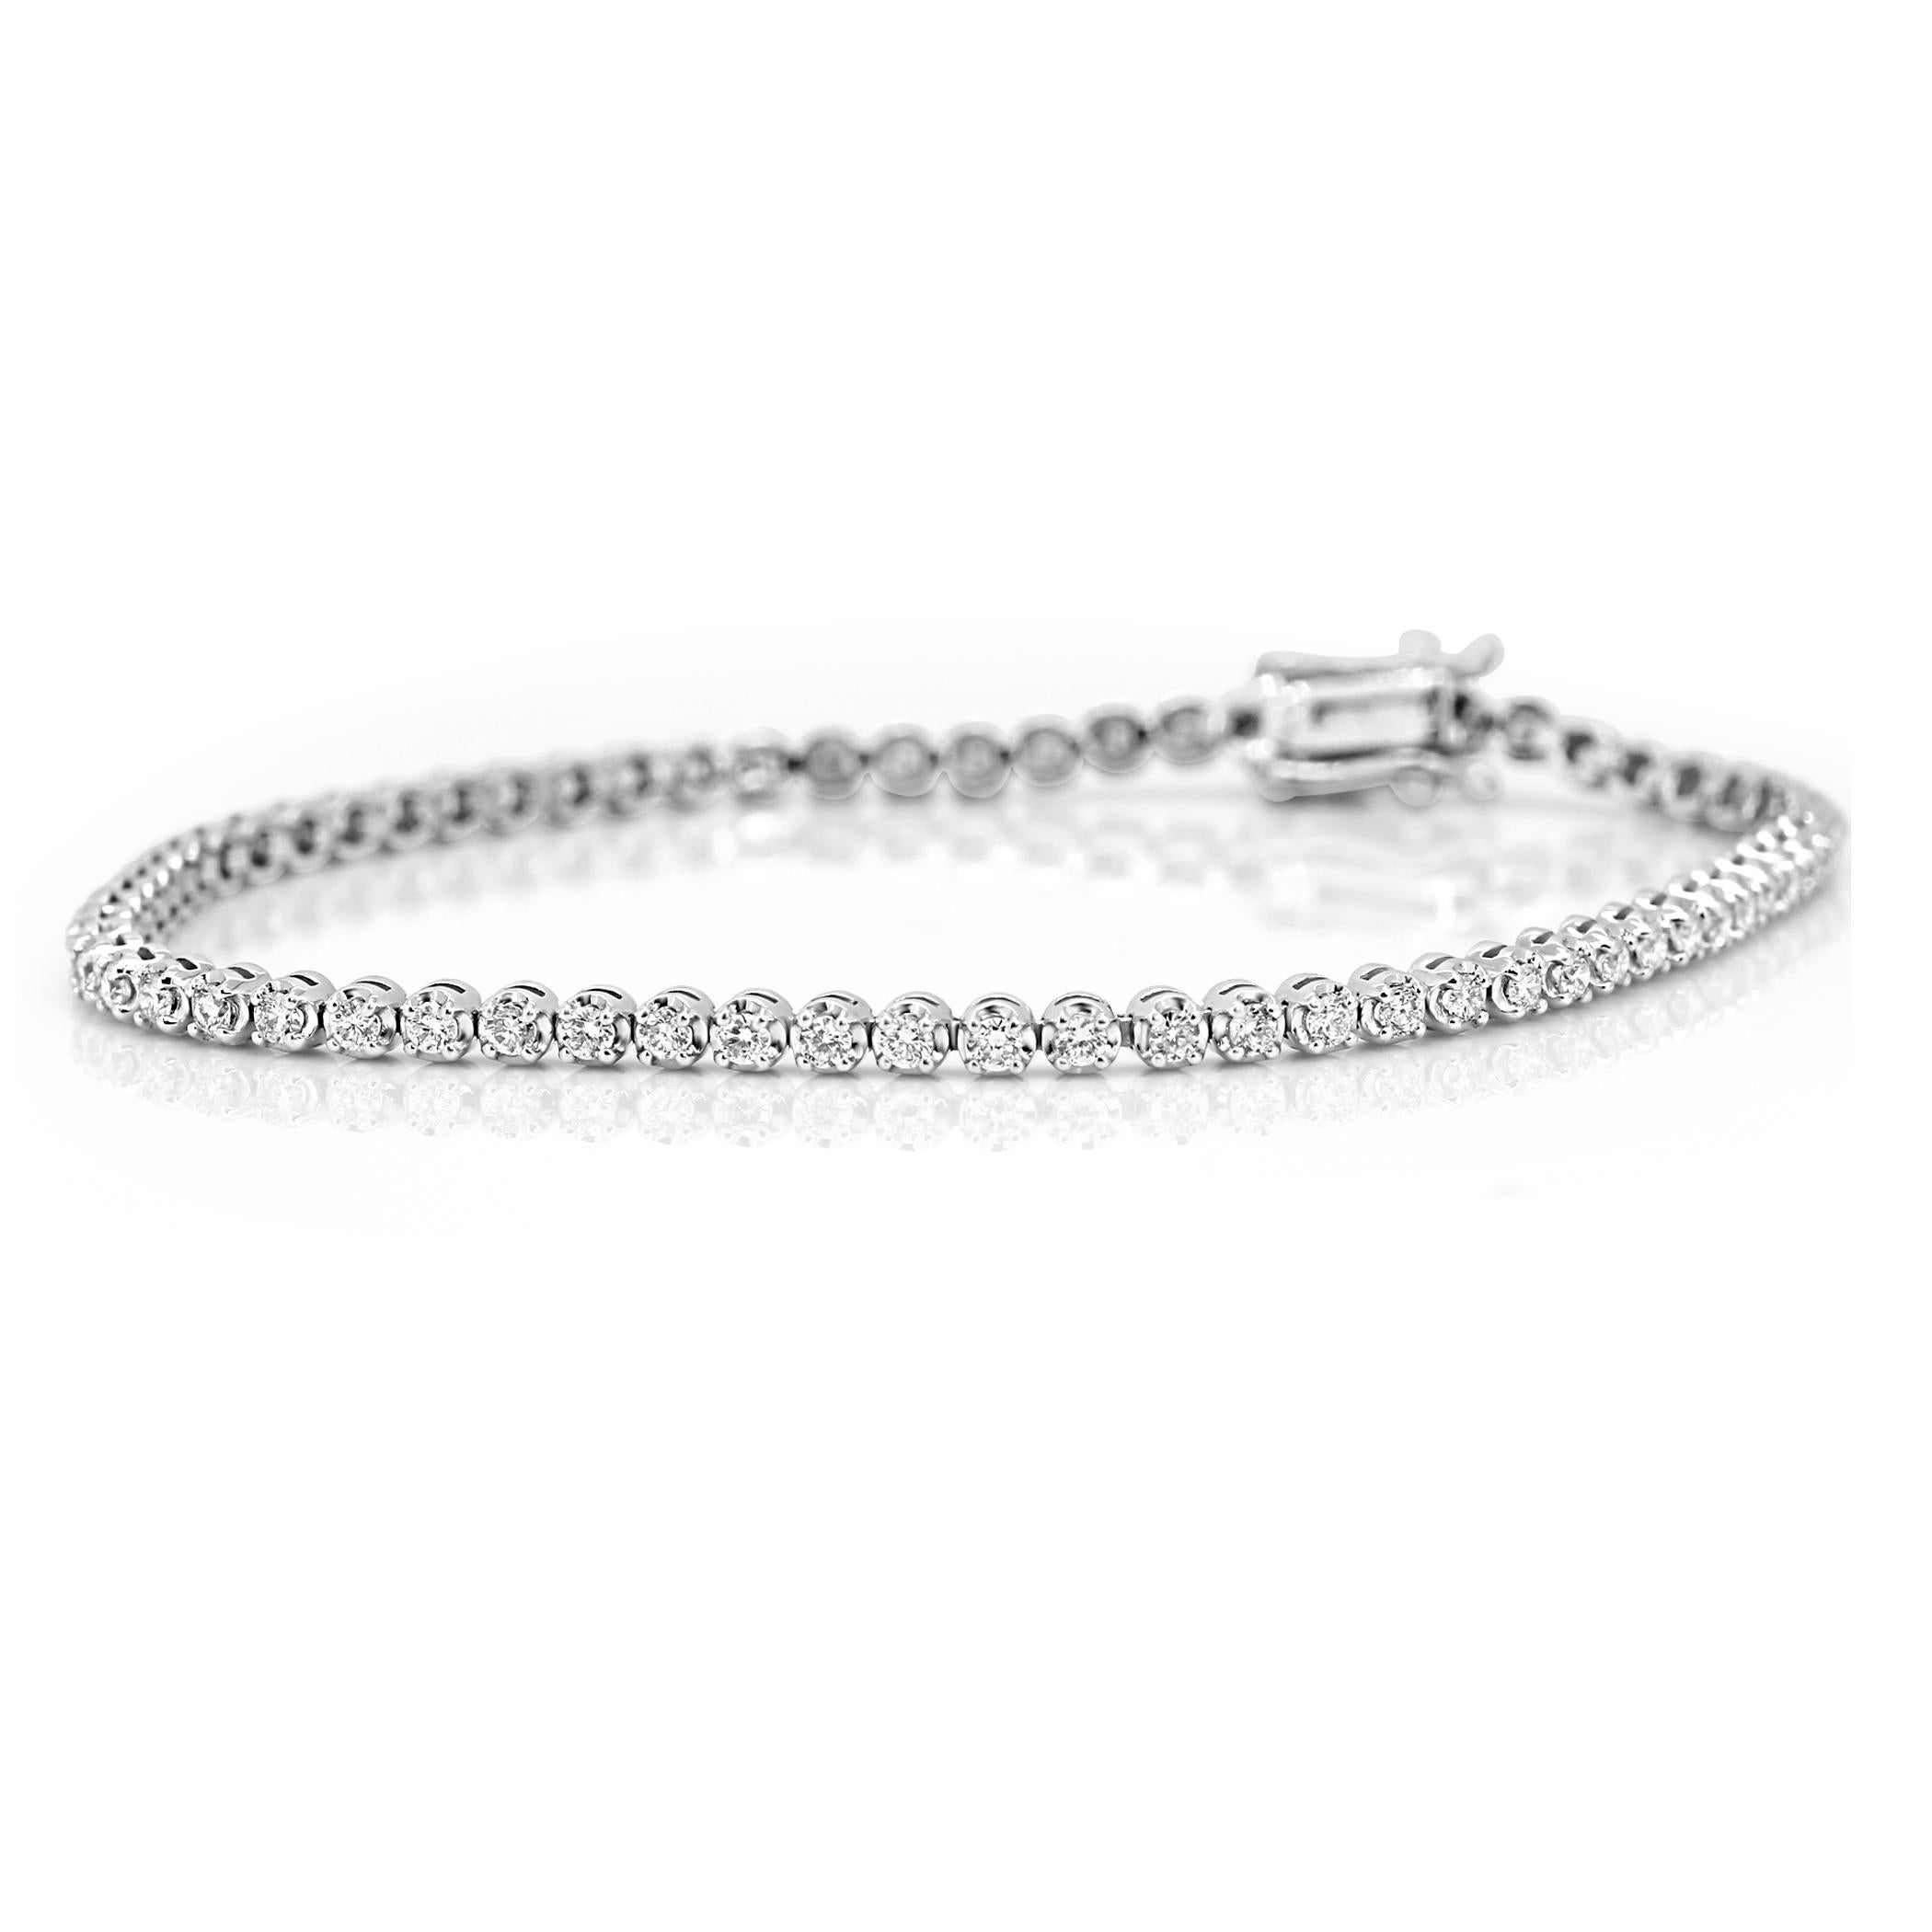 66 White G-H Color SI Clarity Diamond Round 1.45 Carat Set in 14K White Gold Always in Style for Every Occasion Single Stackable Tennis Bracelet. With Triple Lock for Extra safety.

Total Diamond Weight 1.45 Carat
MADE IN USA

Style available in